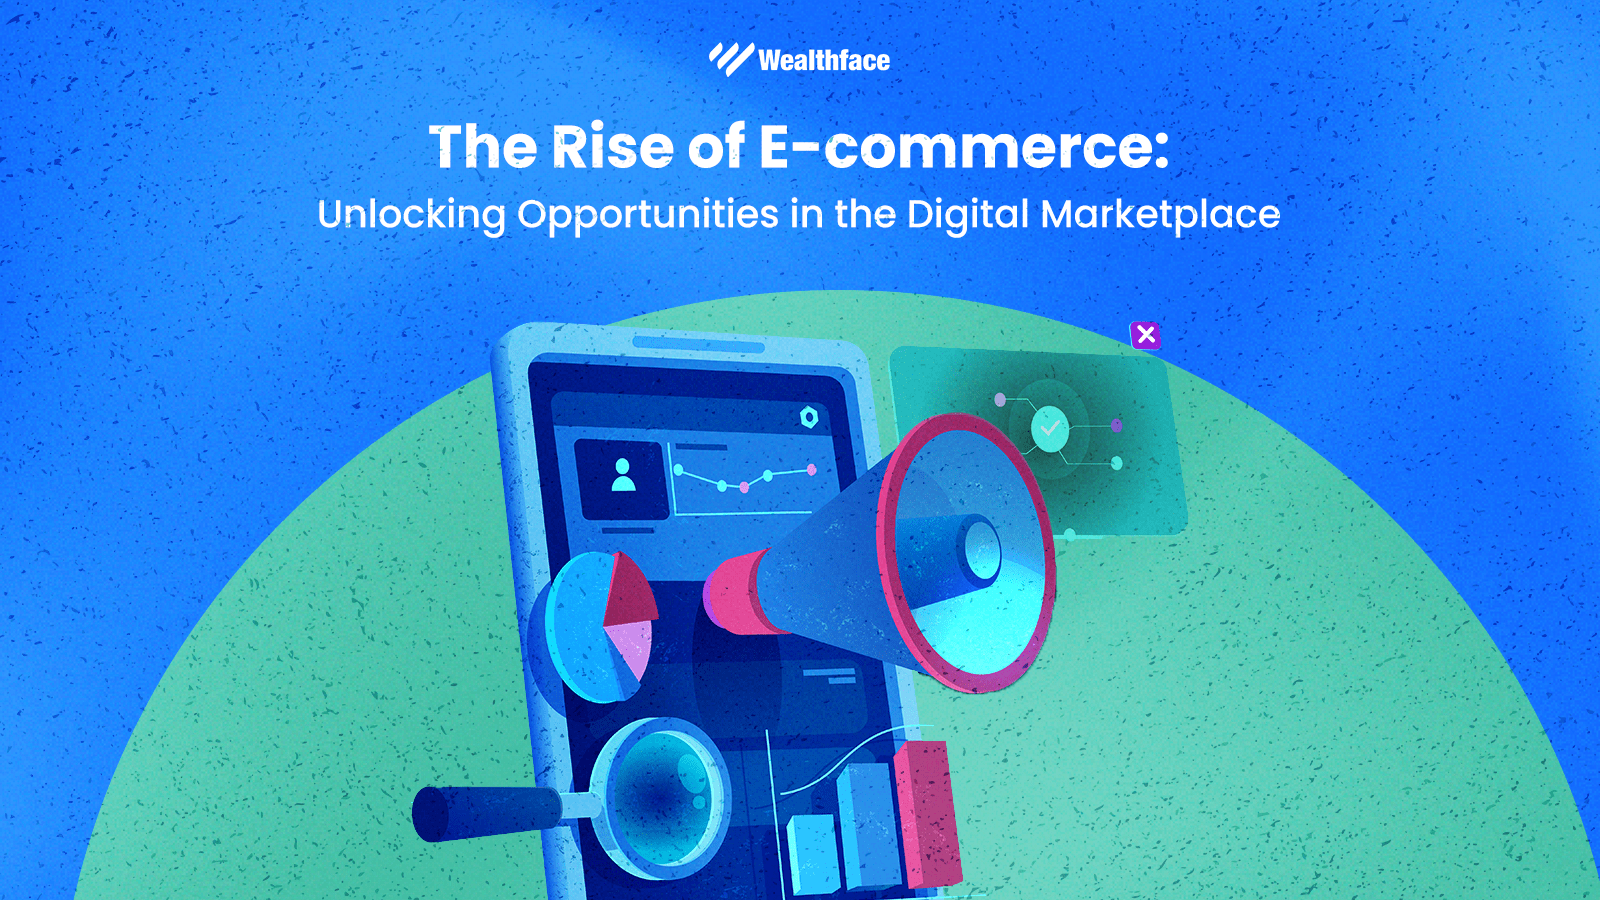 The Rise of E-commerce: Unlocking Opportunities in the Digital Marketplace